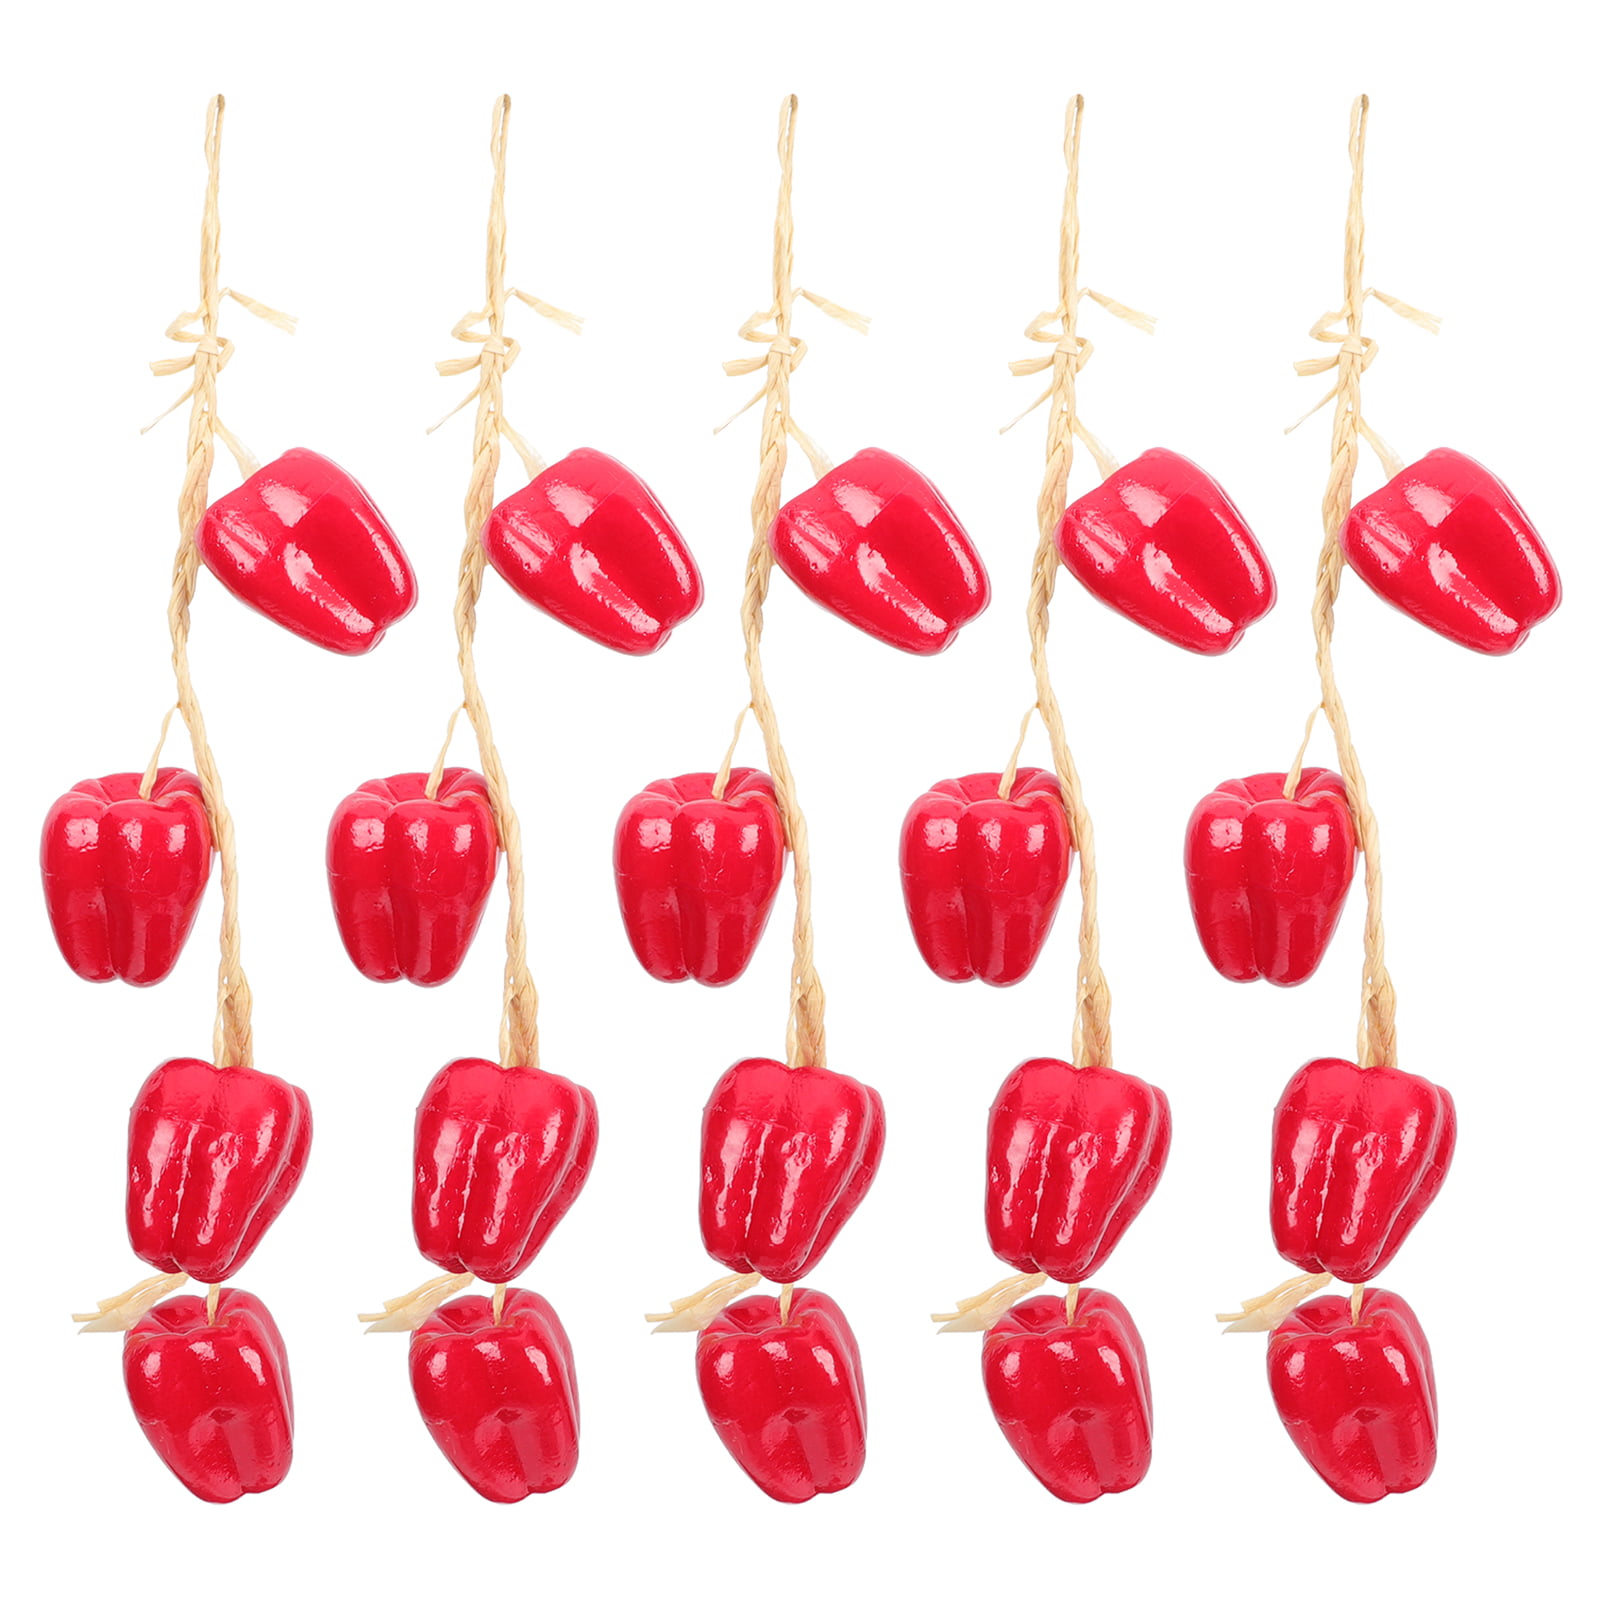 2 x Decorative Artificial Bracket-plant Hanging String with red chili peppers... 